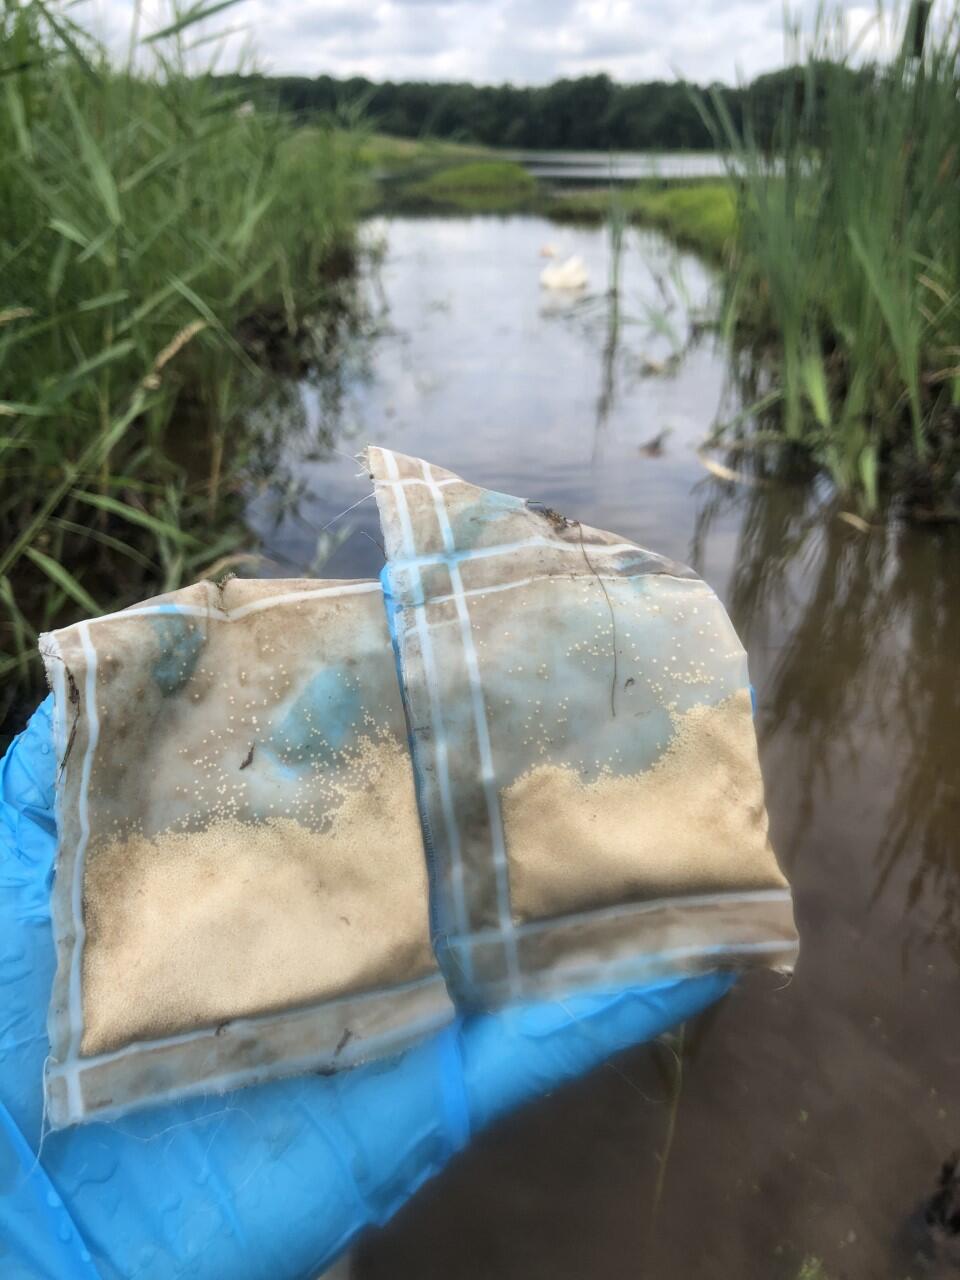 Scientists gloved hands holding sample bag collected from the river in the background